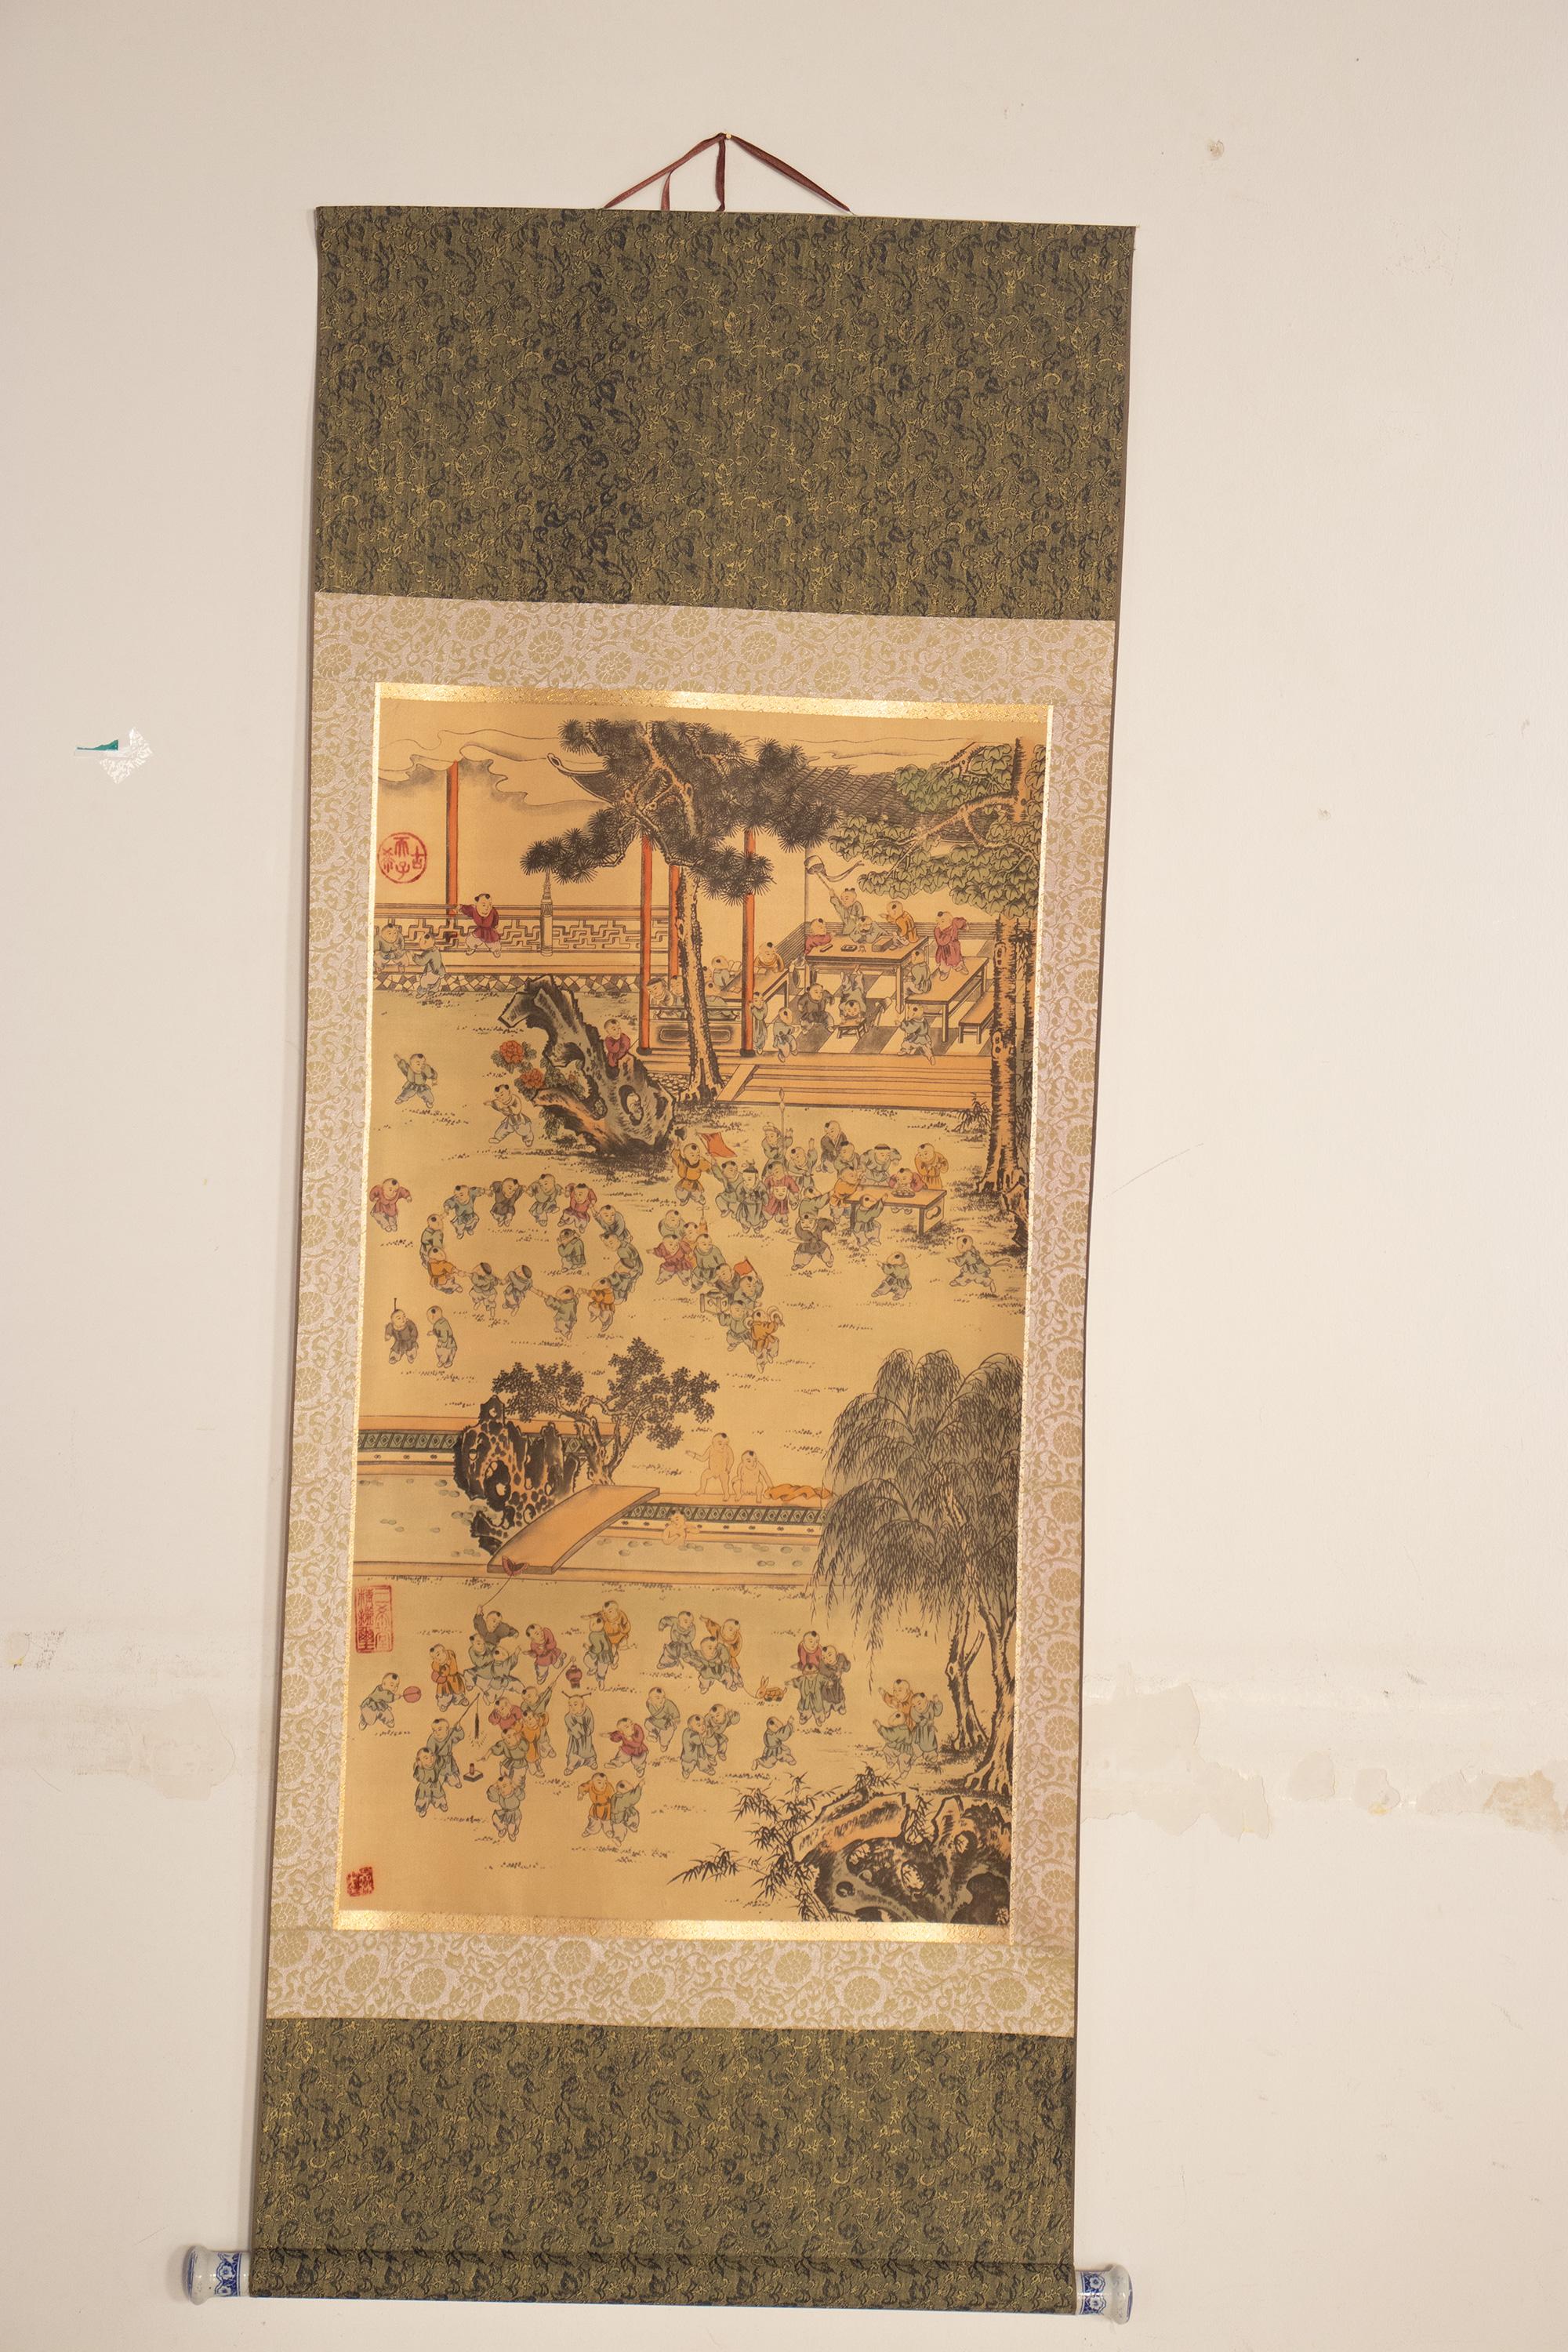 Stunning vintage Chinese Scroll painting, showing scenes of ordinary life, with groups of kids playing together.

The piece has been hand painted and dates back to the first half of the XXth century.

It has been painted on the typical rice